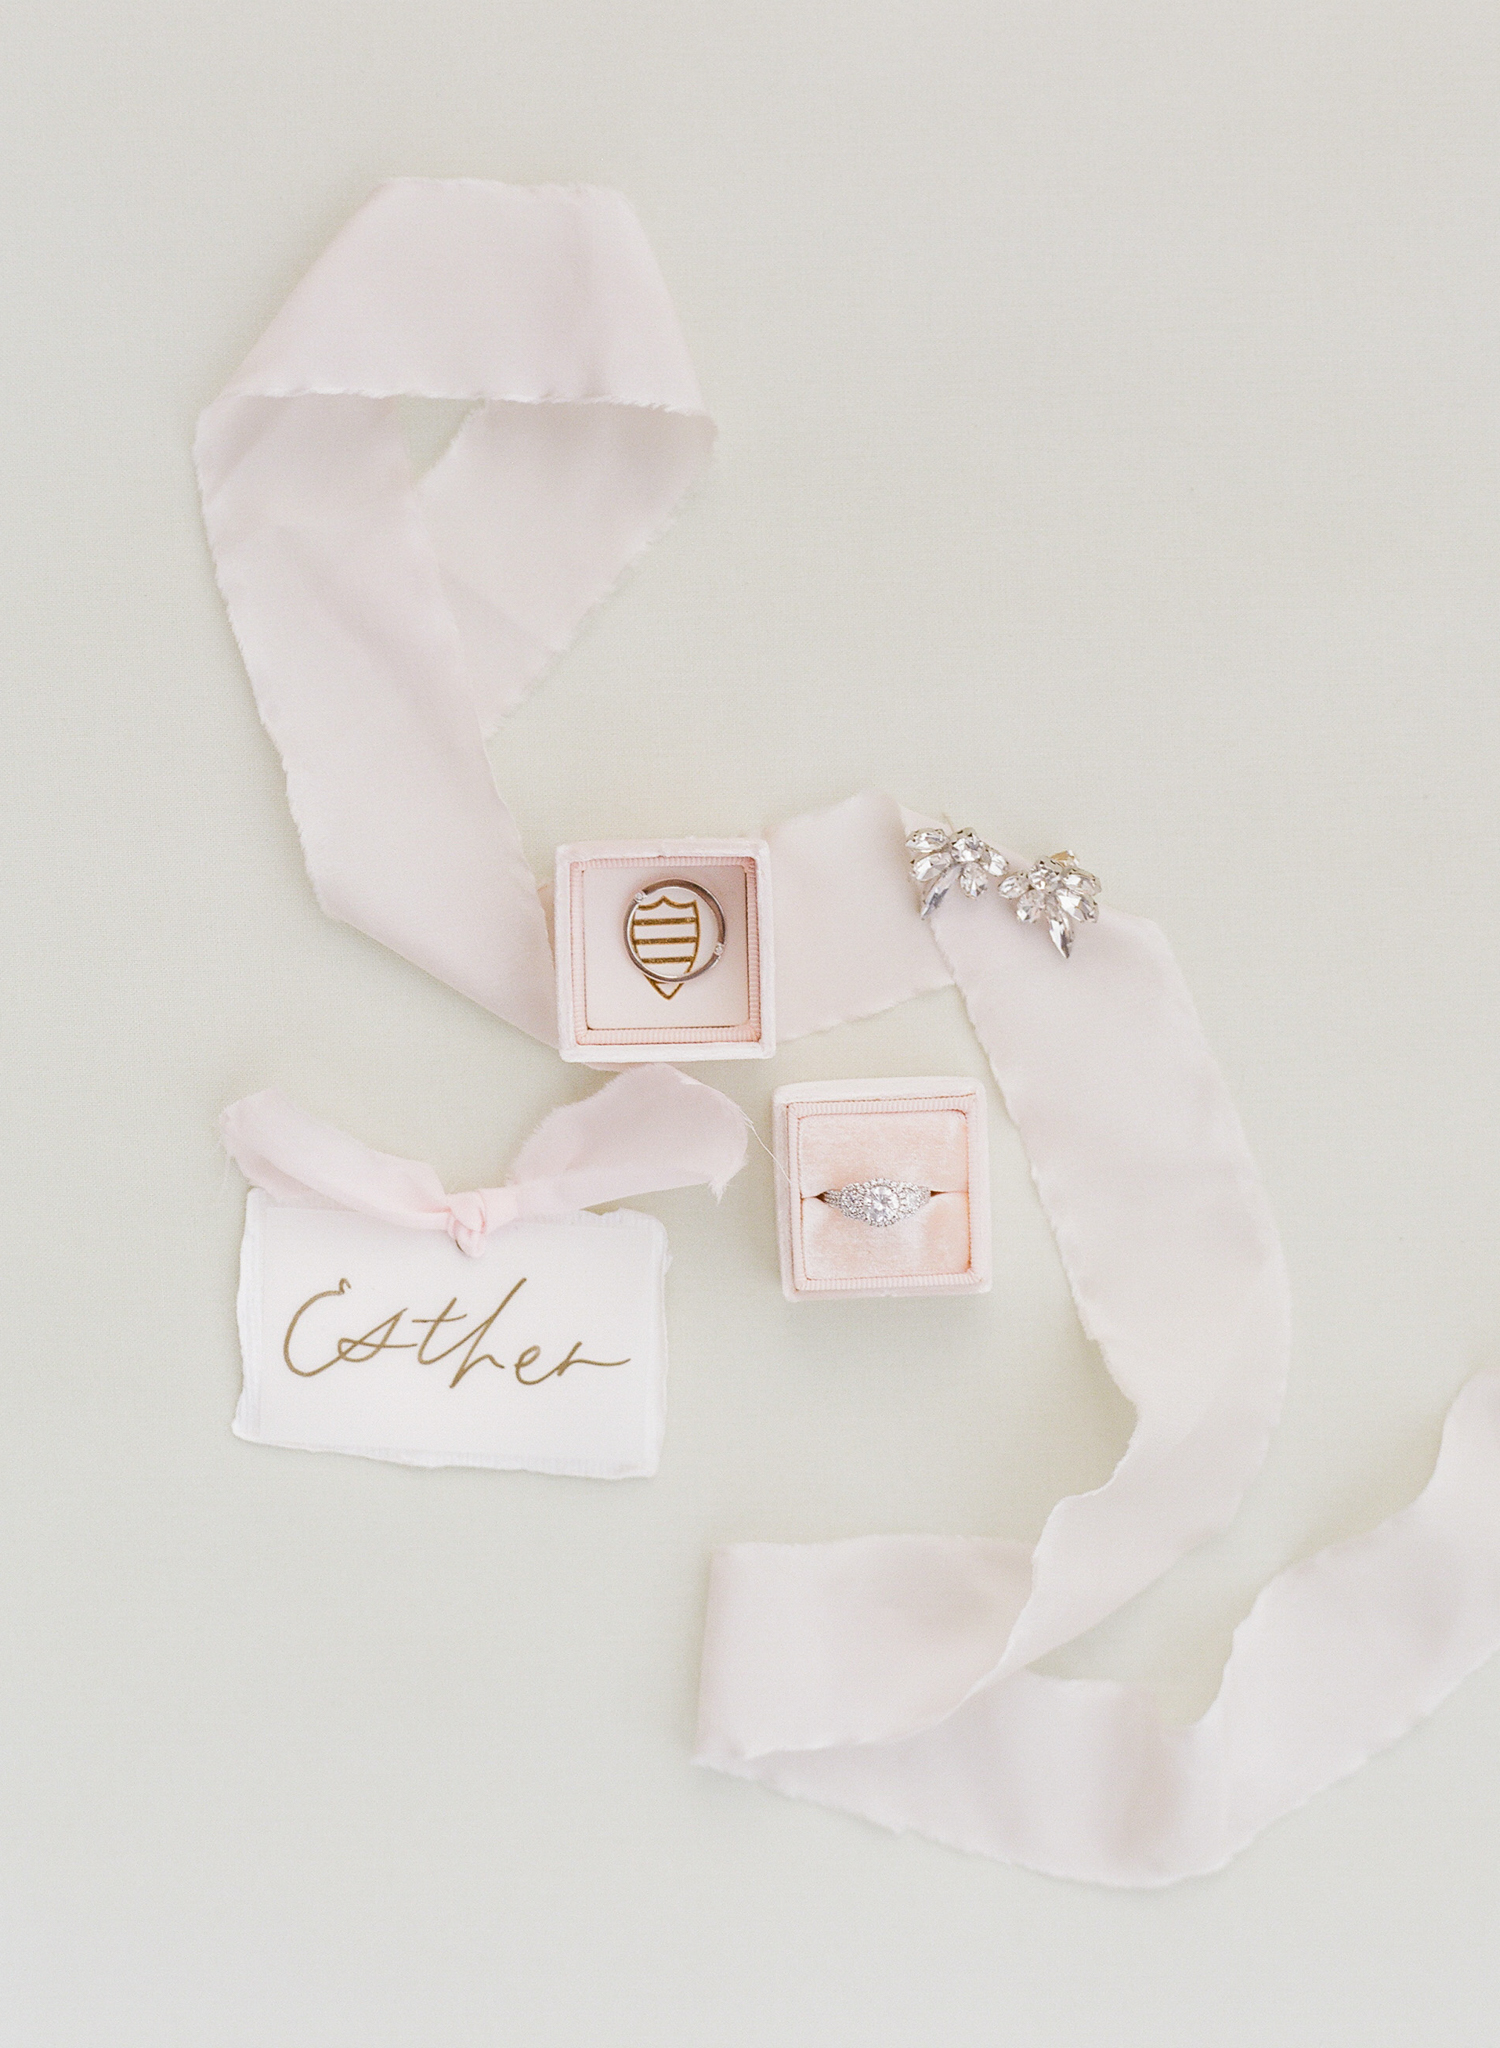 Legare Waring House Wedding Photography | Charleston Wedding Photographer | Charleston Film Photographer | Molly Carr Photography | The Petal Report | Wedding Stationary | Wedding Rings | Engagement Ring in Pink Velvet Ring Box | Wedding Place Card 